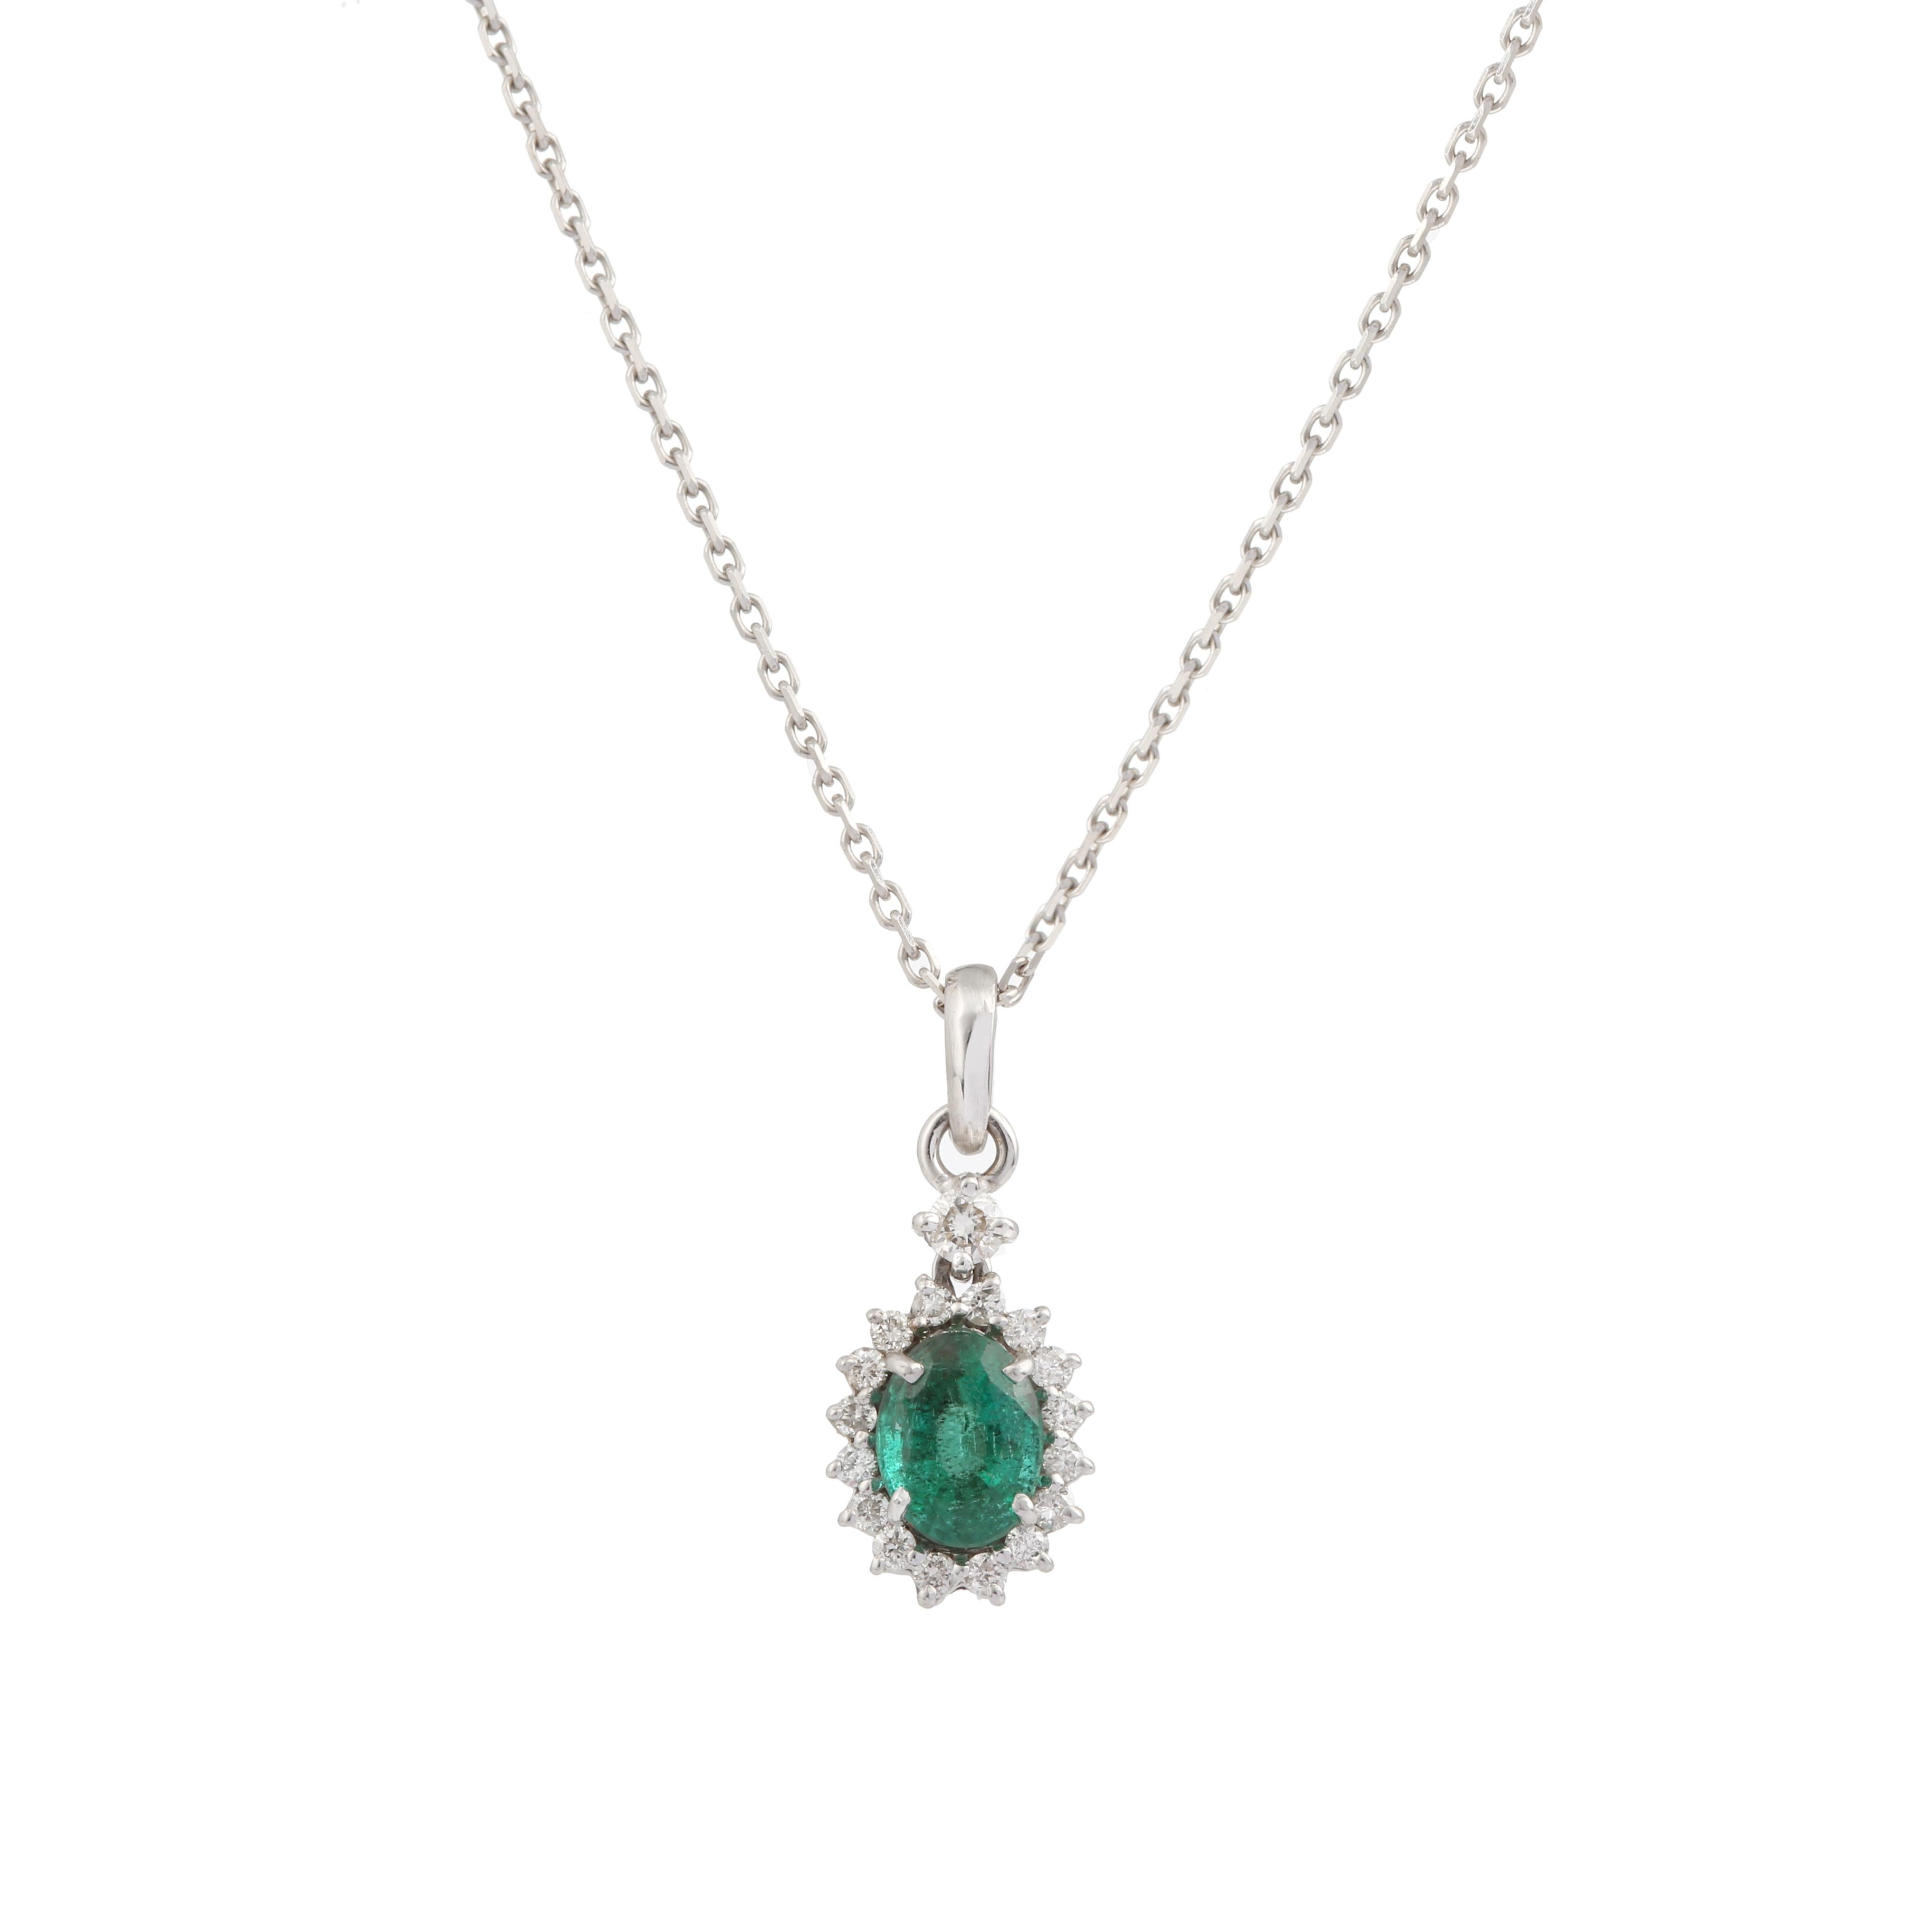 White gold necklace, the pendant set with an oval-cut emerald in a diamond setting and with a diamond on the clasp.

Emerald weight : 0.91 carats

Total estimated weight of diamonds: 0.20 carats

Length : 43 cm (16.92 inches)

Dimensions : 13.64 x